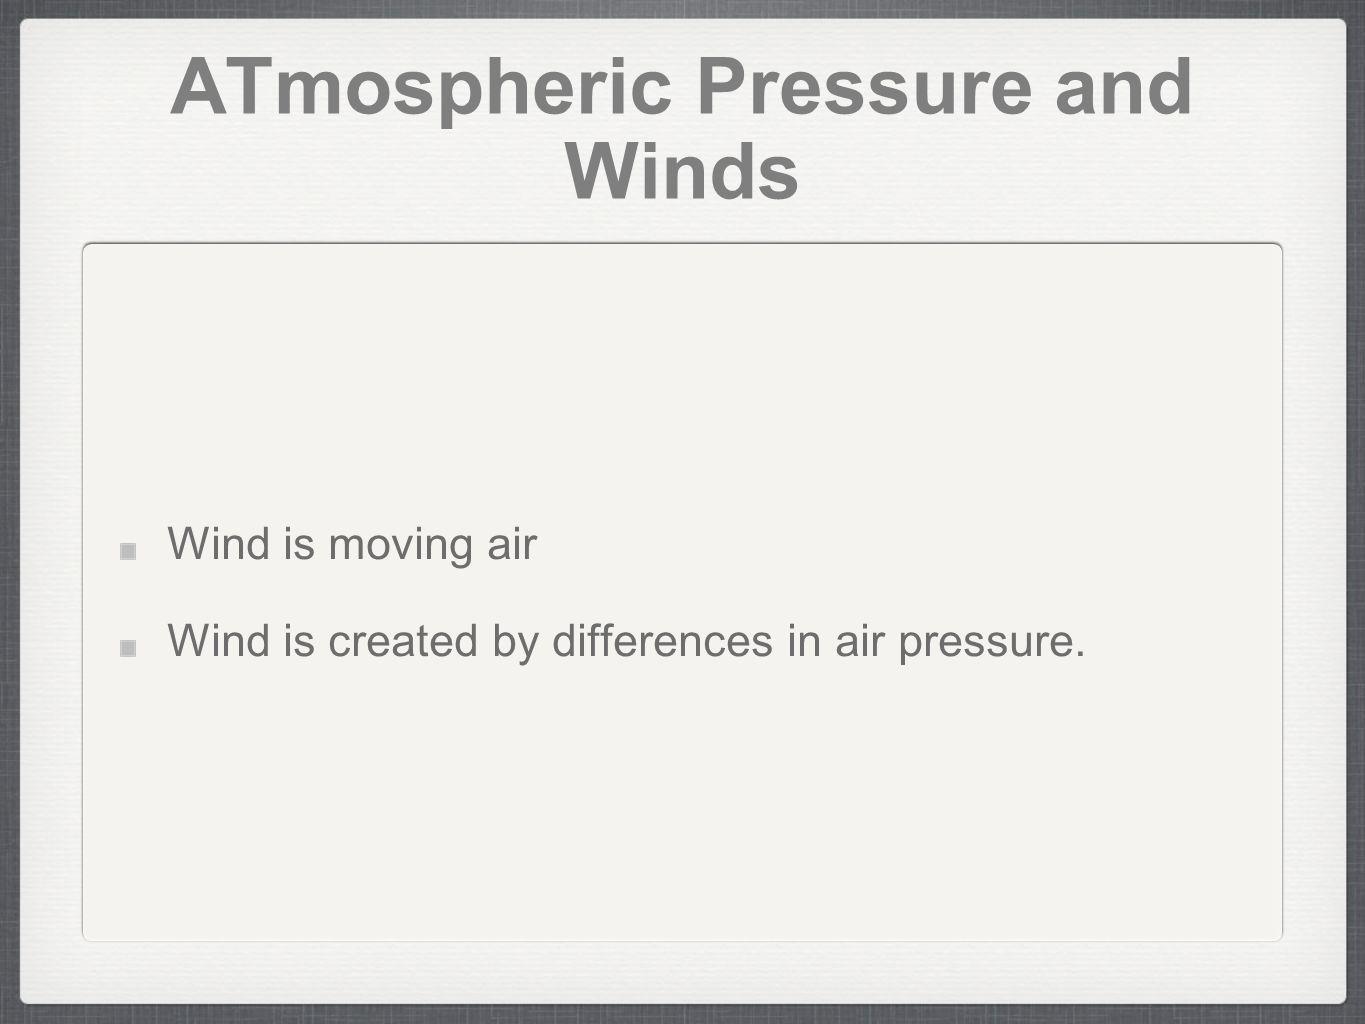 ATmospheric Pressure and Winds